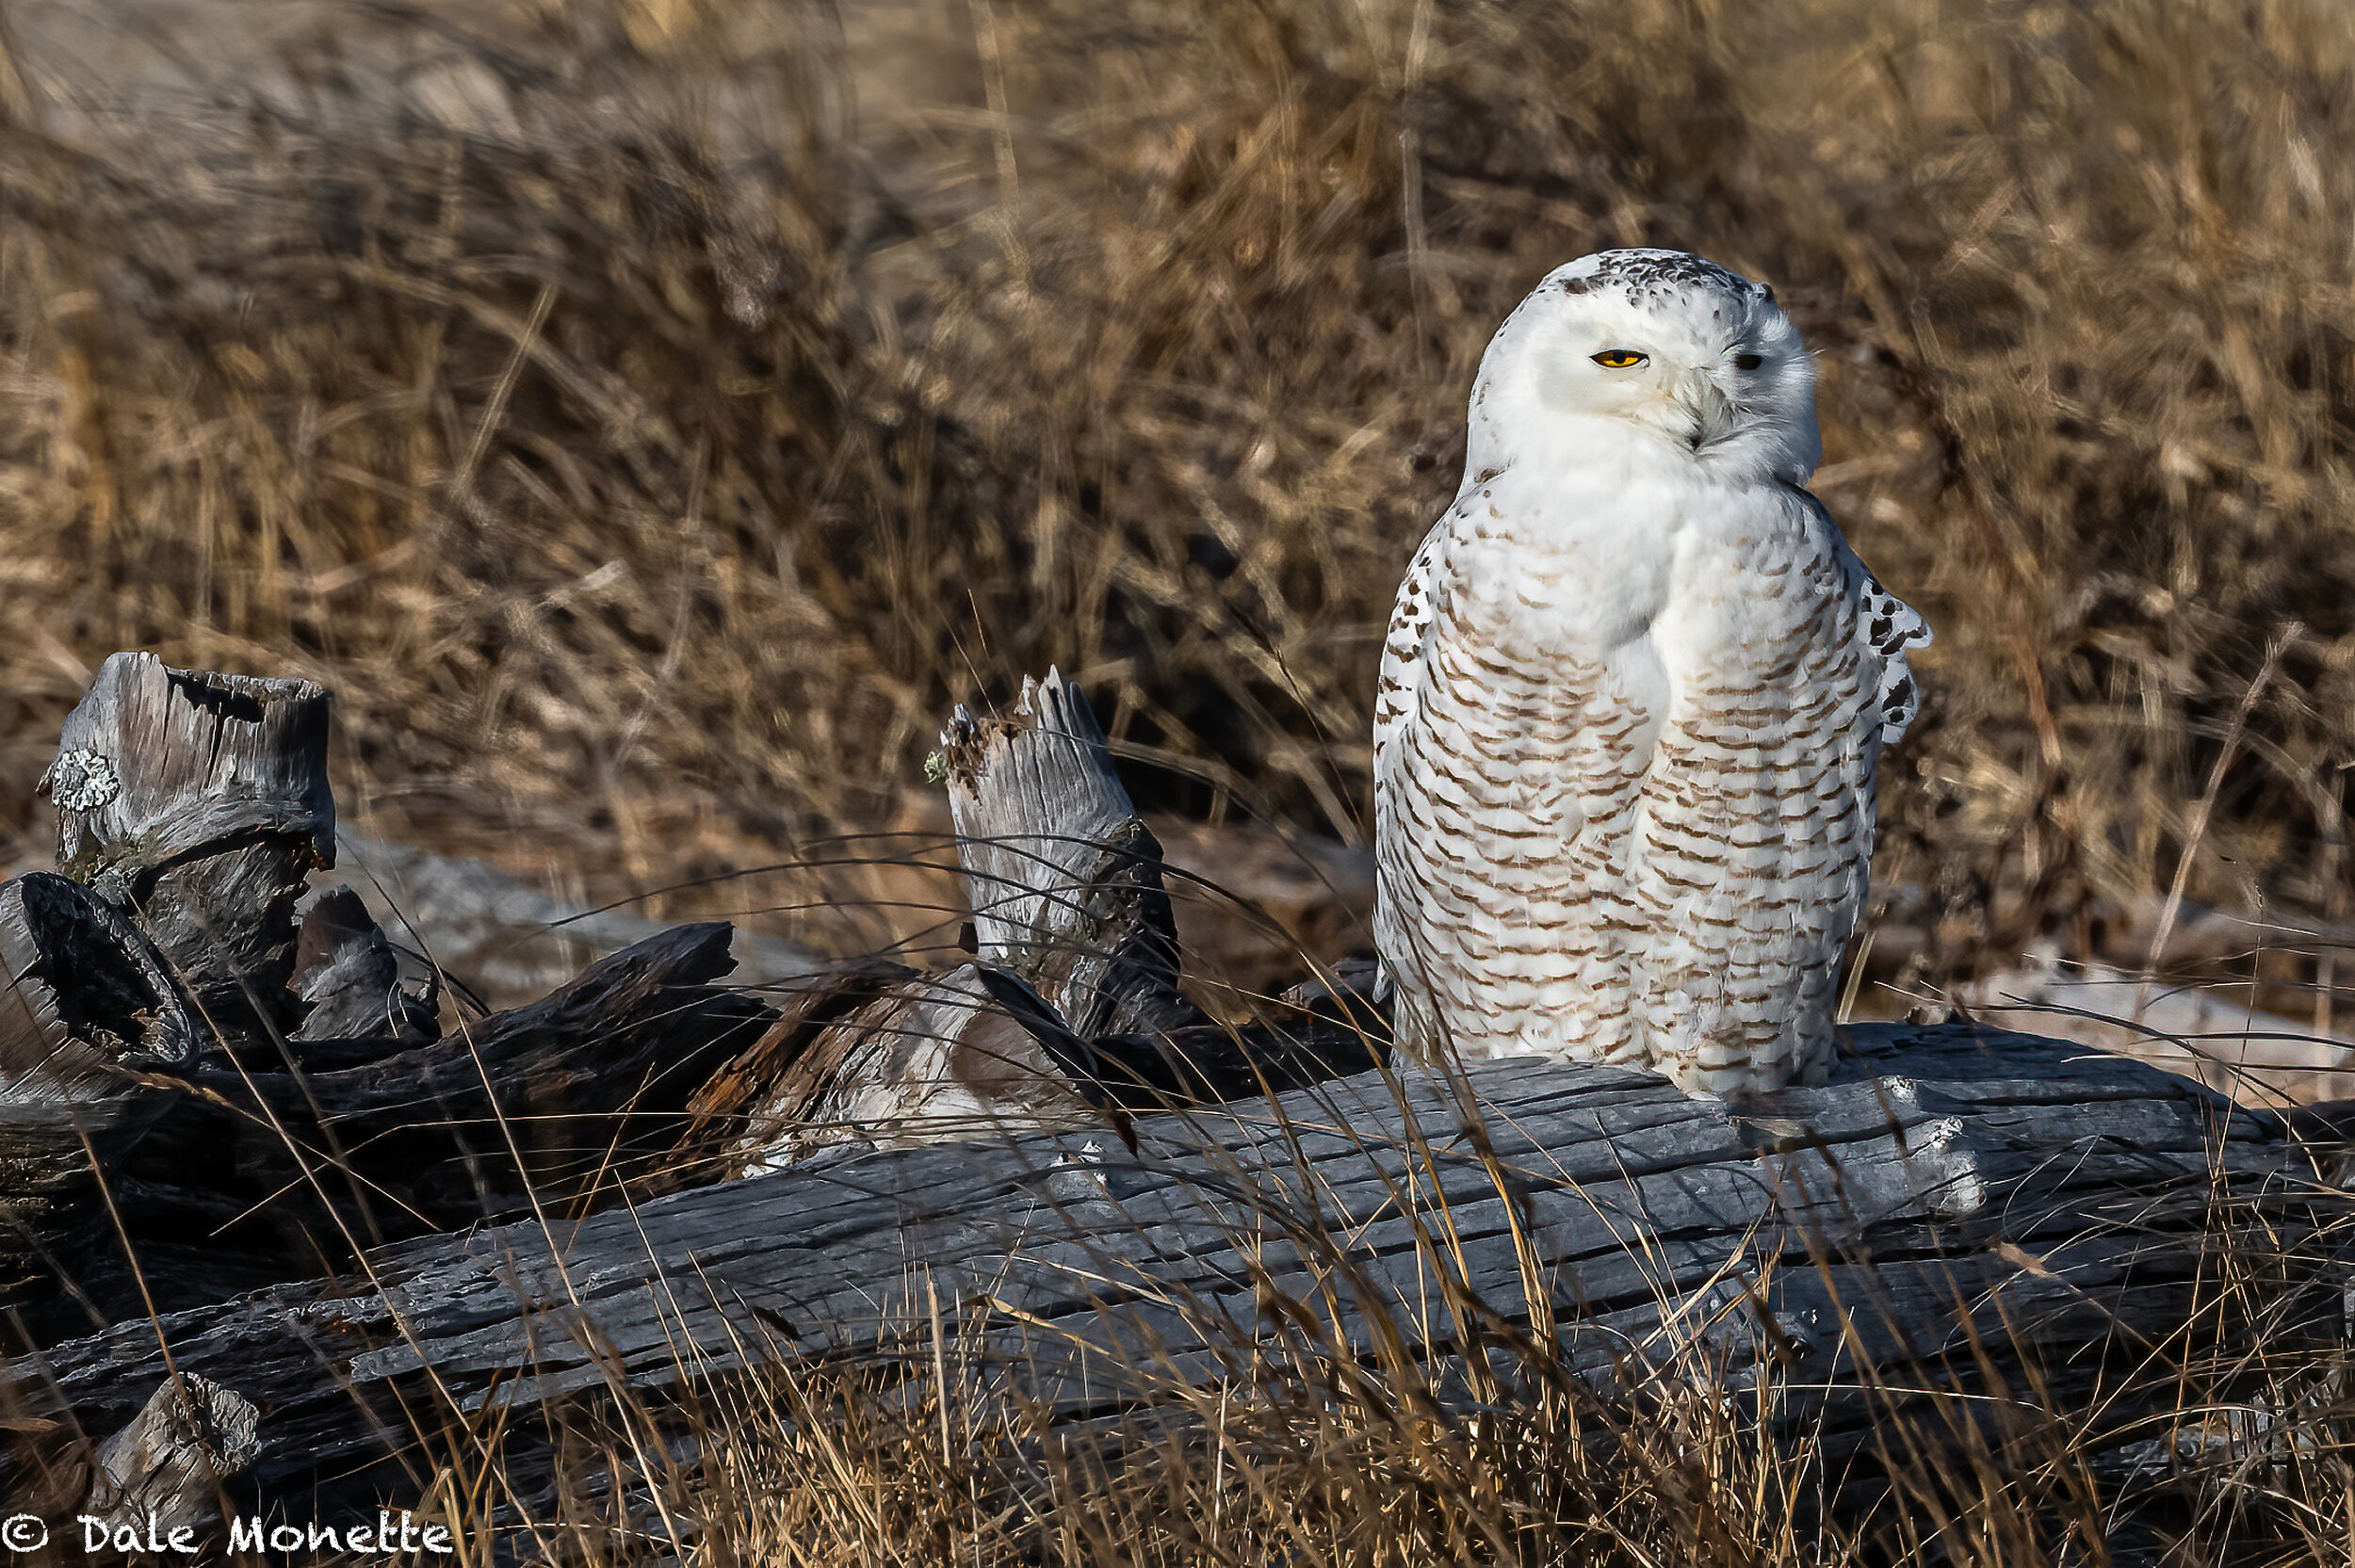   Snowy owl, Salisbury State Park, 3/8/21.  Probably one of the last to leave for home up north of the Arctic Circle.  This one was sunning itself and hunting at the same time!  An awesome find for me.  